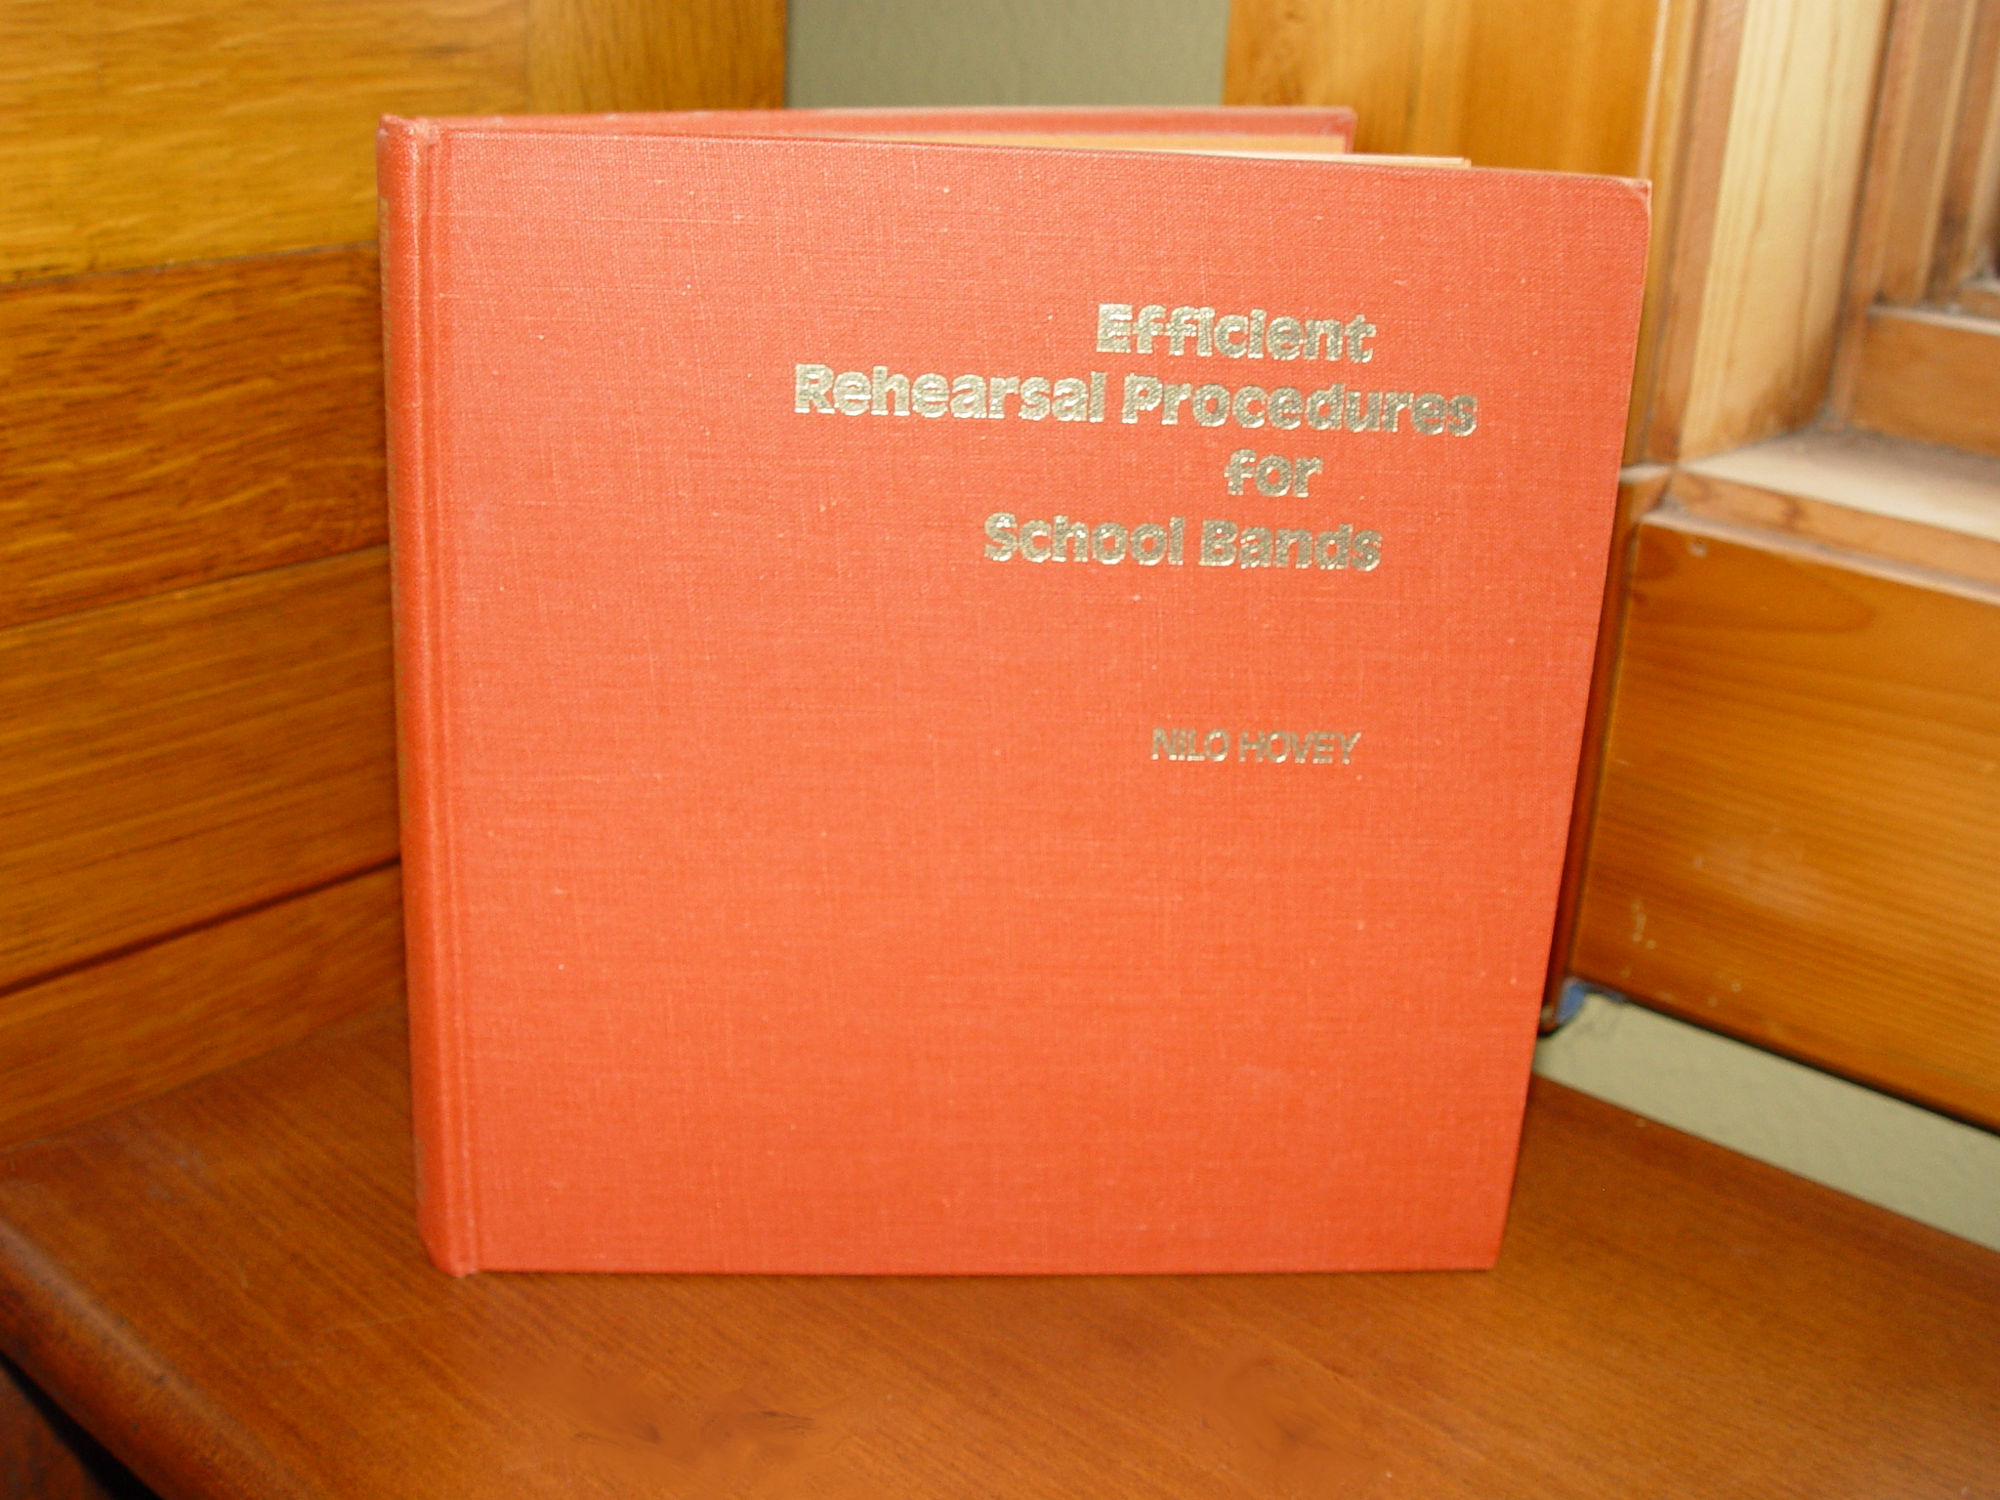 Efficient Rehearsal Procedures for School
                        Bands 1976 by Nilo Hovey